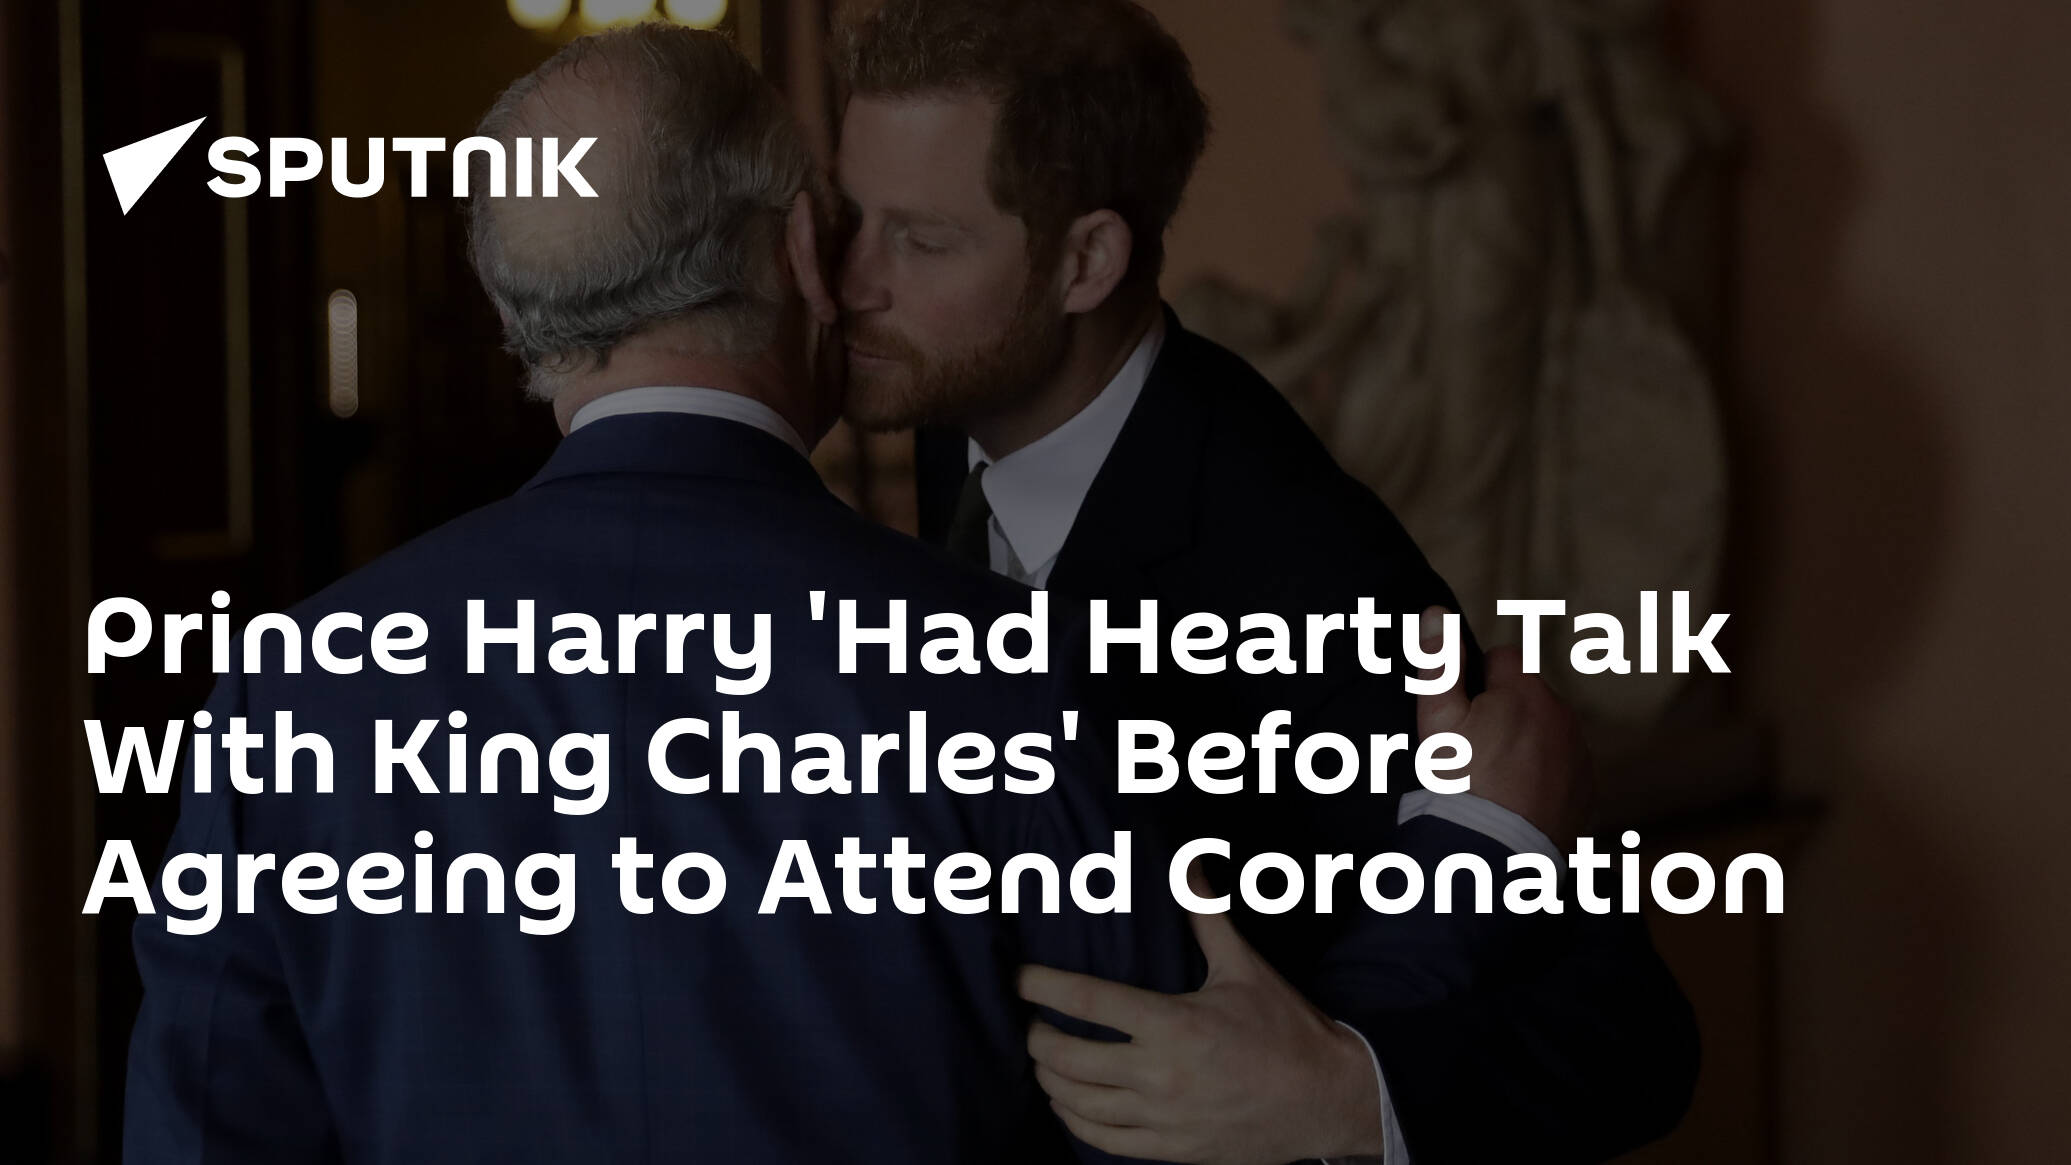 Prince Harry 'Had Hearty Talk With King Charles' Before Agreeing to Attend Coronation